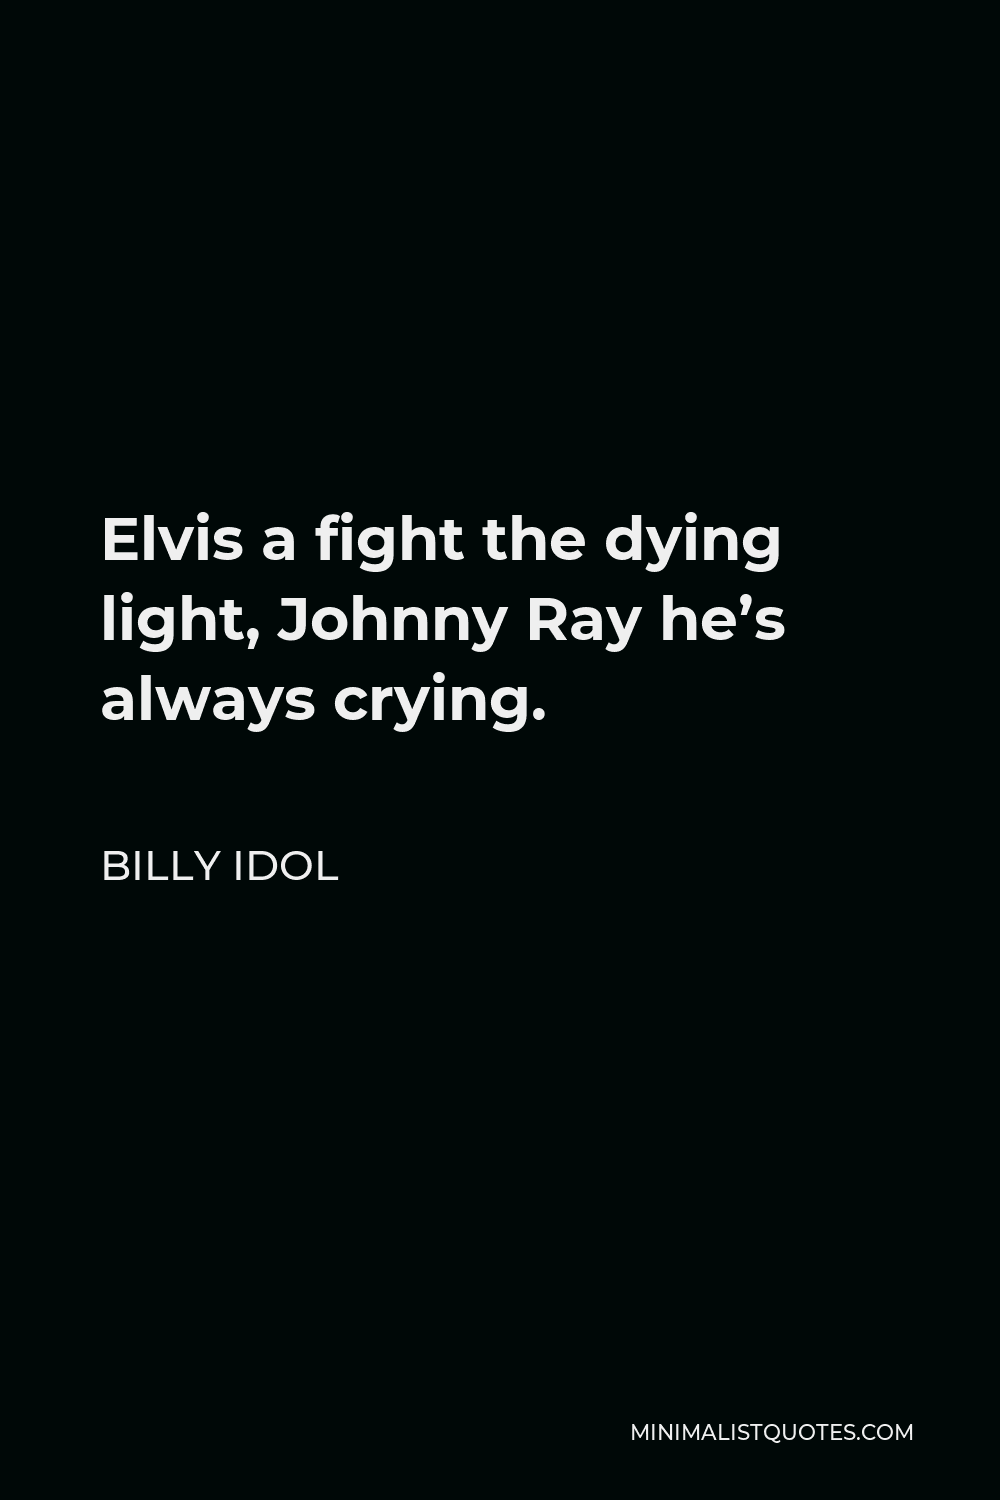 Billy Idol Quote - Elvis a fight the dying light, Johnny Ray he’s always crying.